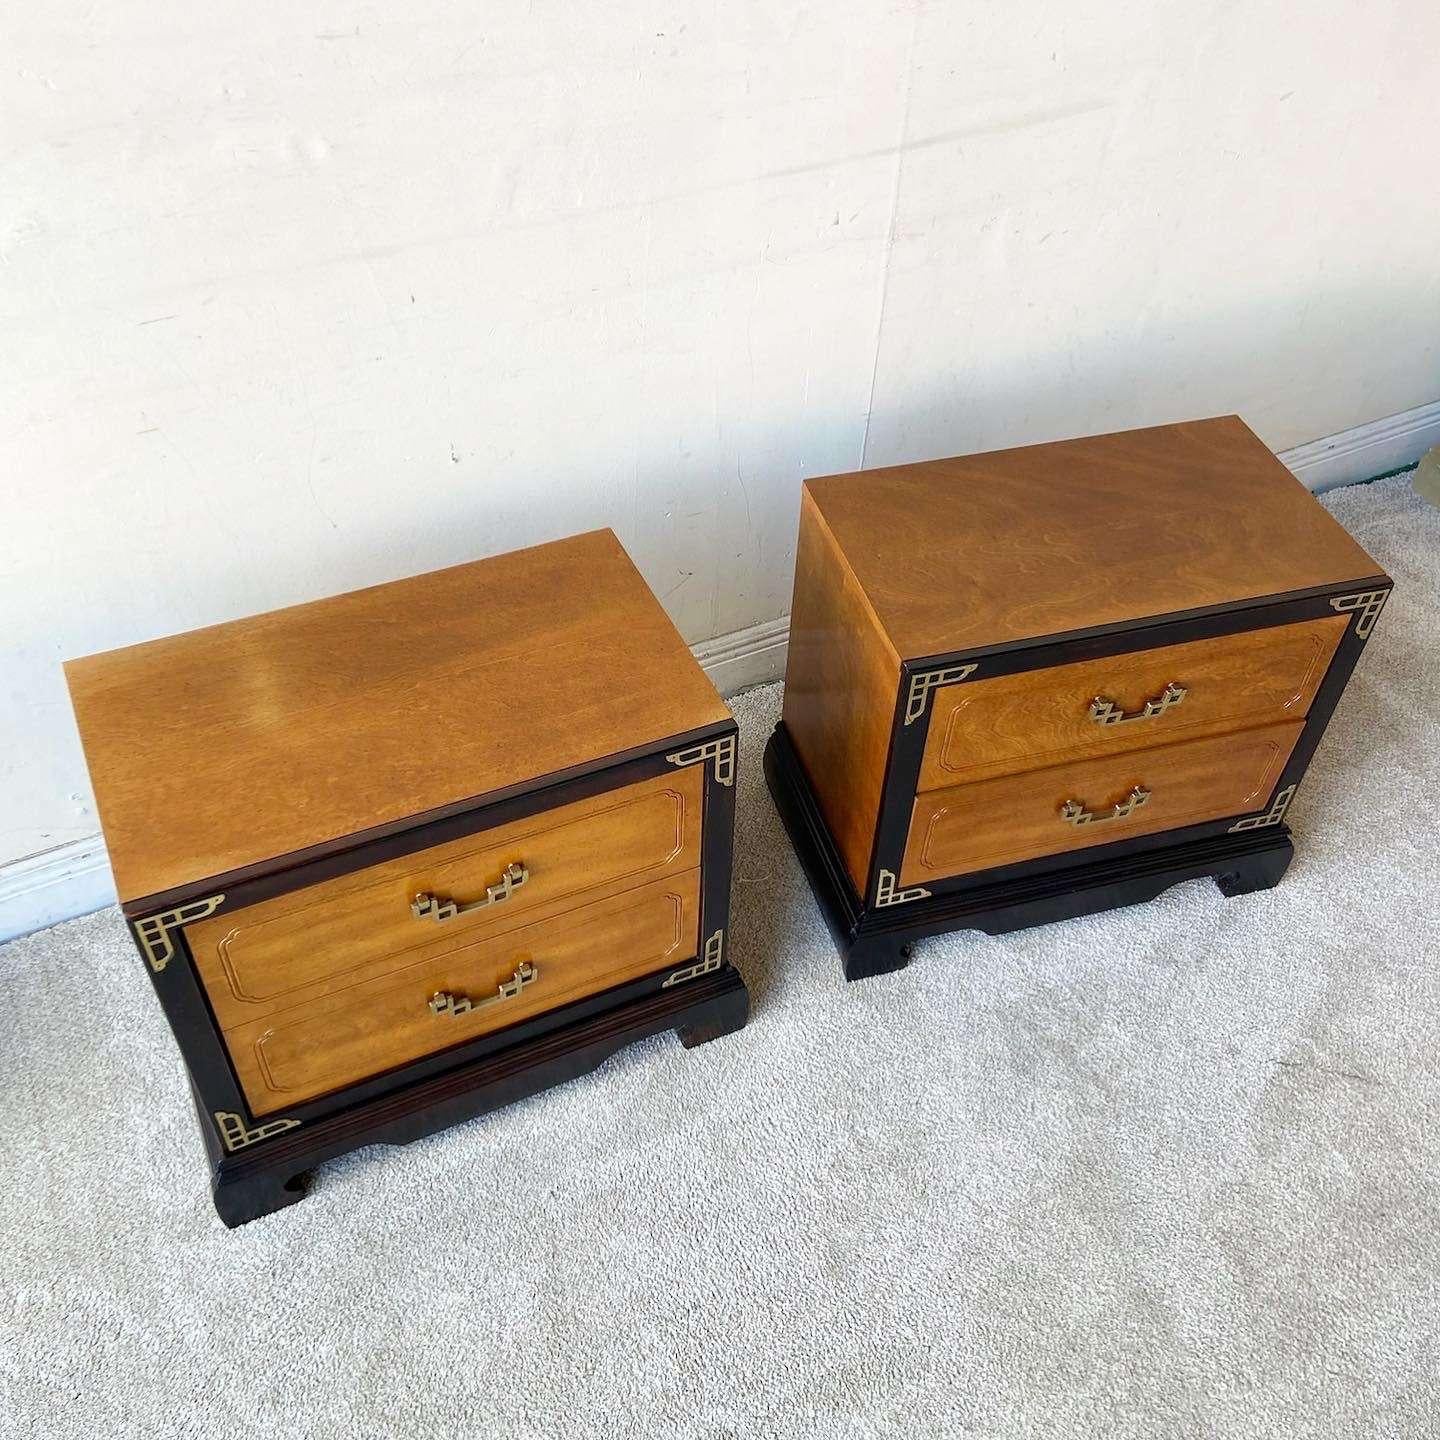 Late 20th Century Vintage Chinoiserie Burl and Black Nighstands by Bassett Furniture - a Pair For Sale